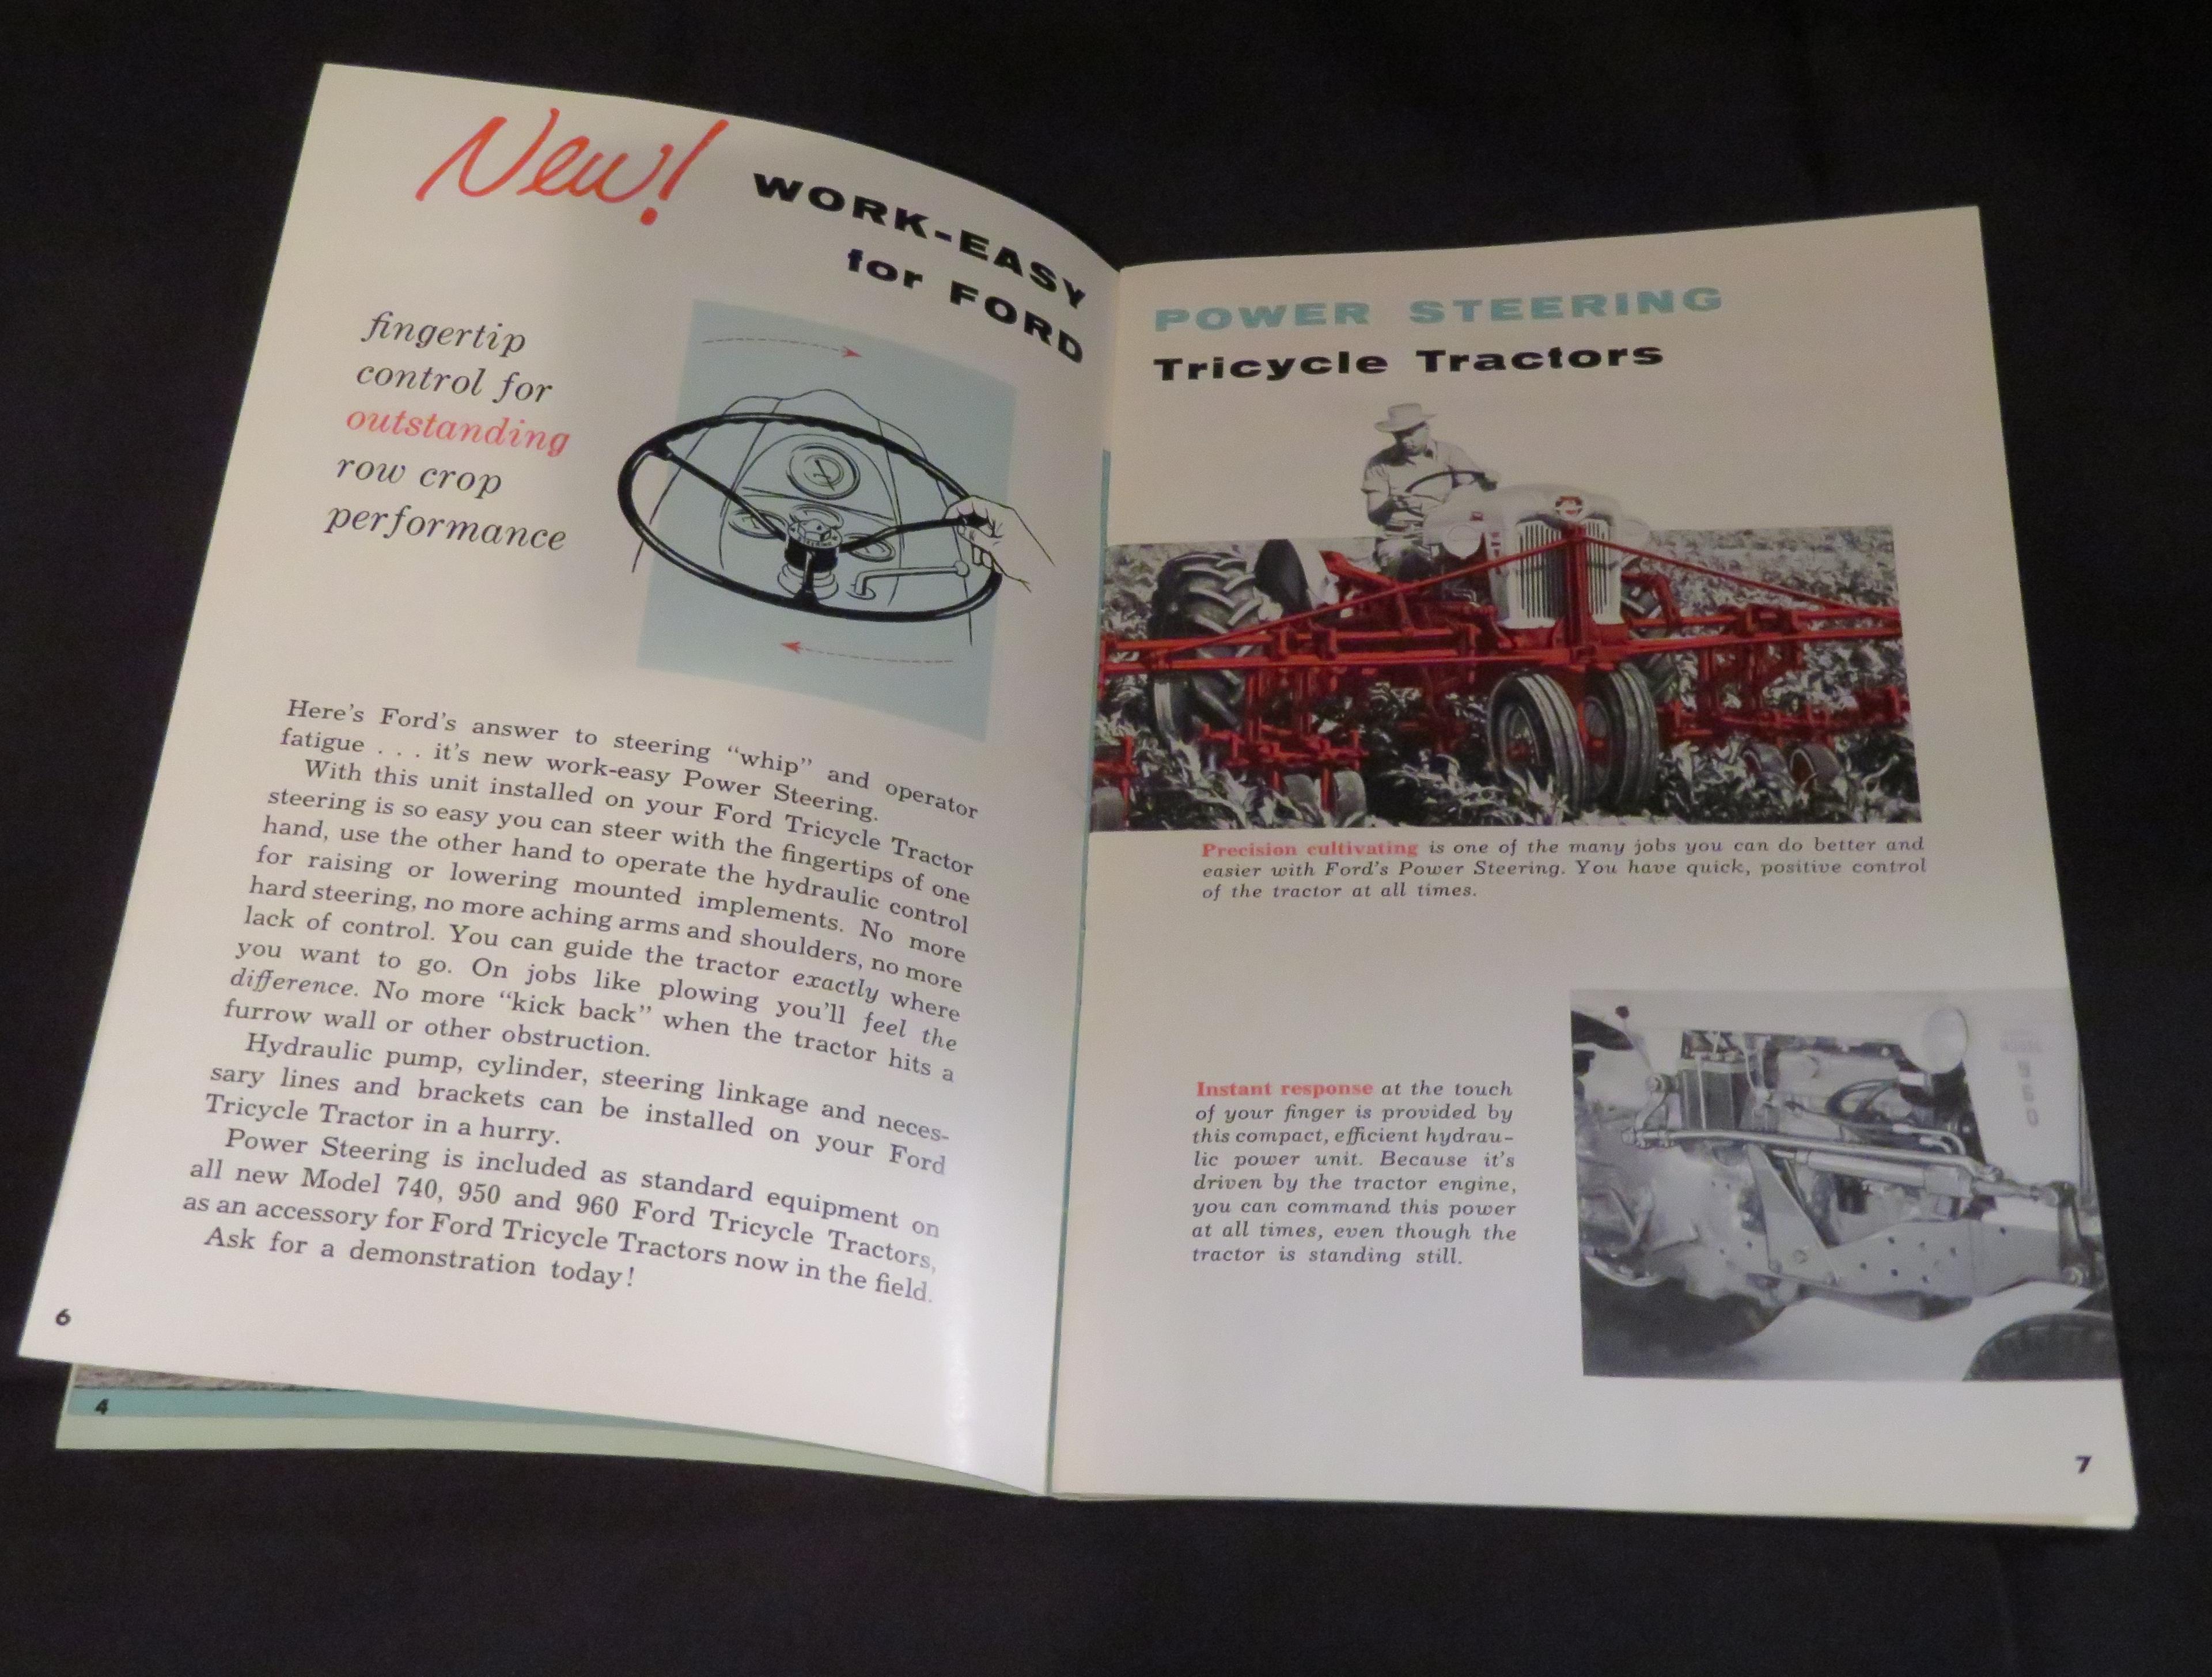 FORD TRACTOR ACCESSORIES - SALES BROCHURE